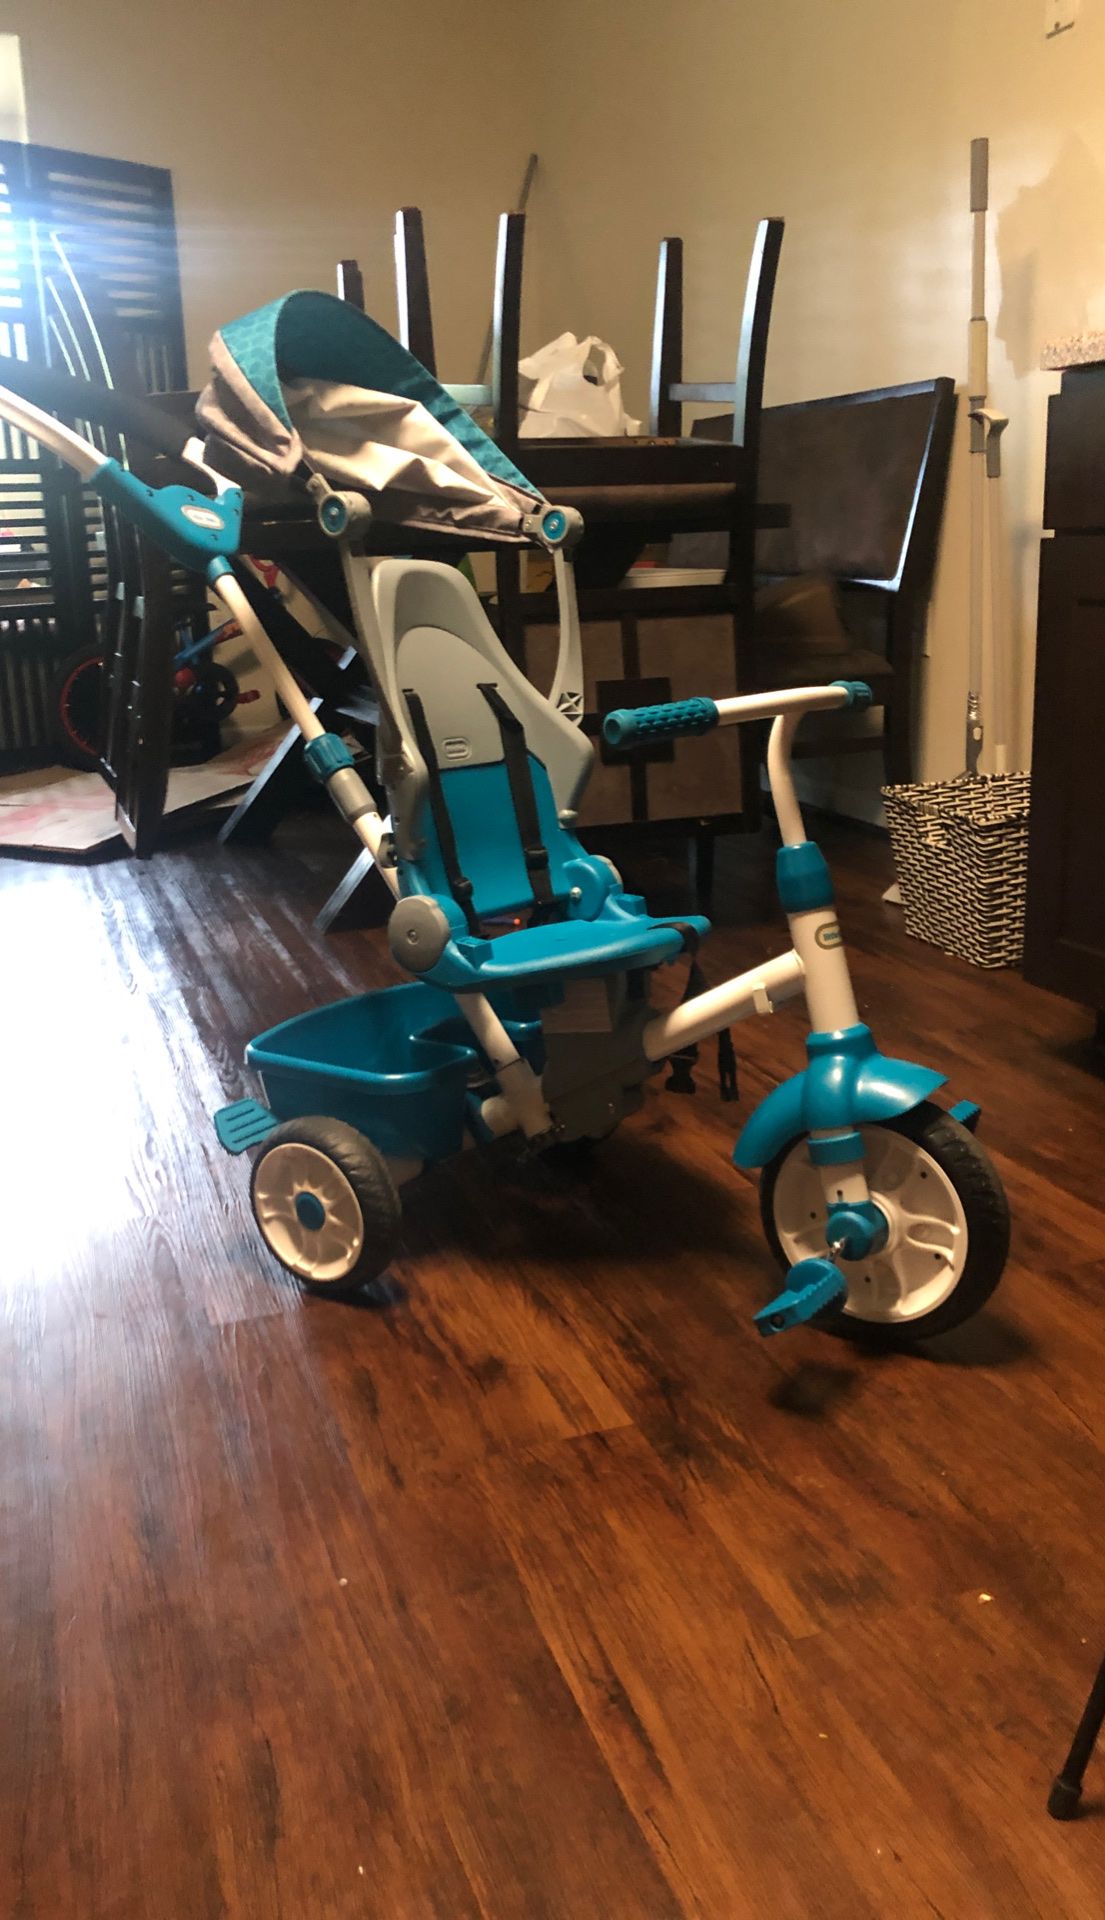 Bike for toddlers and baby’s